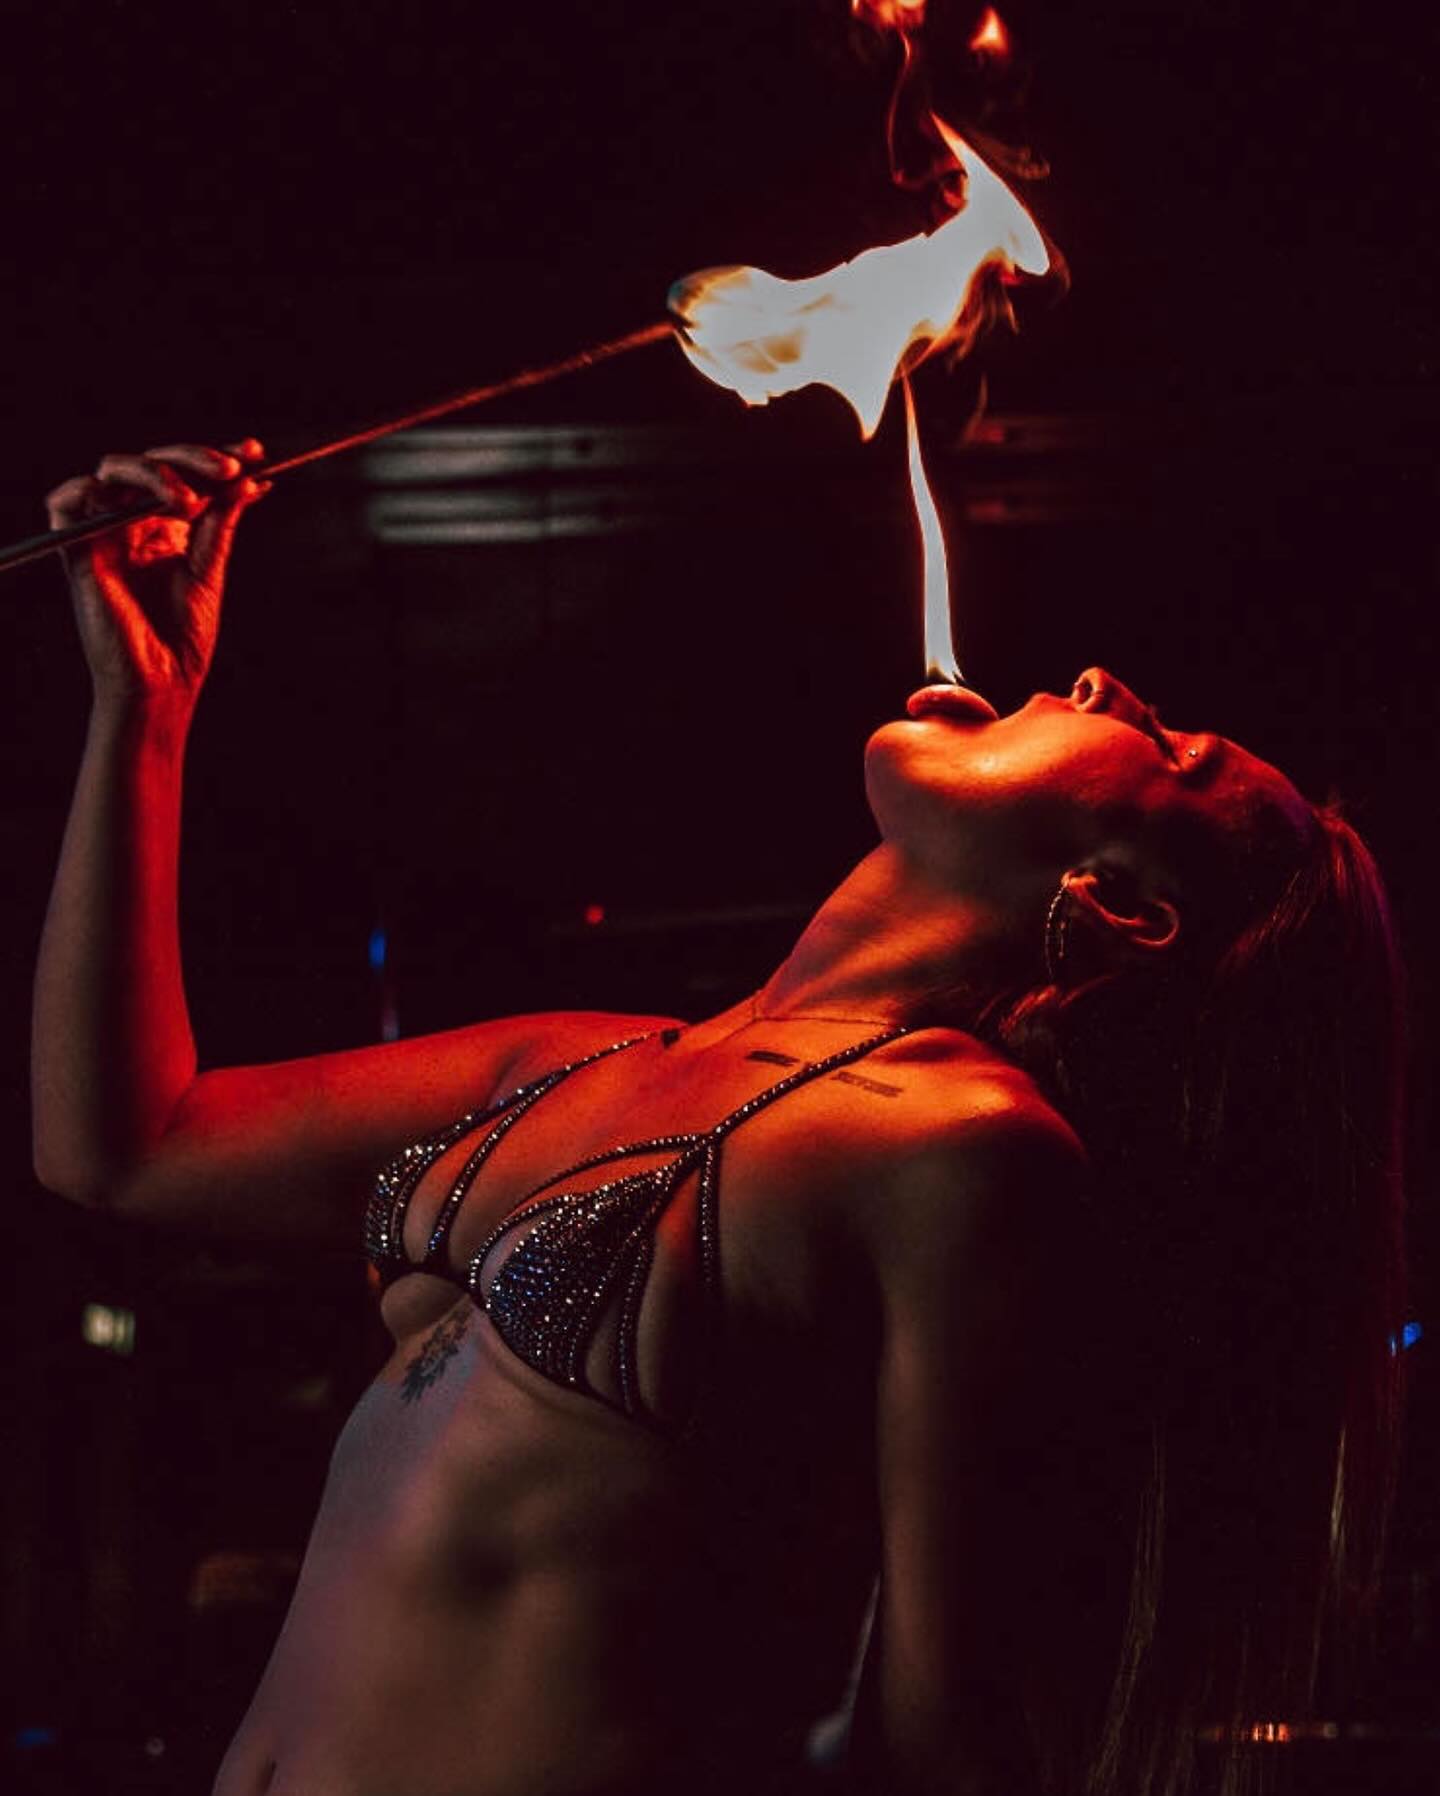 Are you coming to my show debut @thepalaceadelaide ❤️‍🔥
Come simmer in some shadowy, firey vibes with me ✨

📸 @blondie_pix 

#showgirl #burlesque #fireeating #dubstep #fireperformer